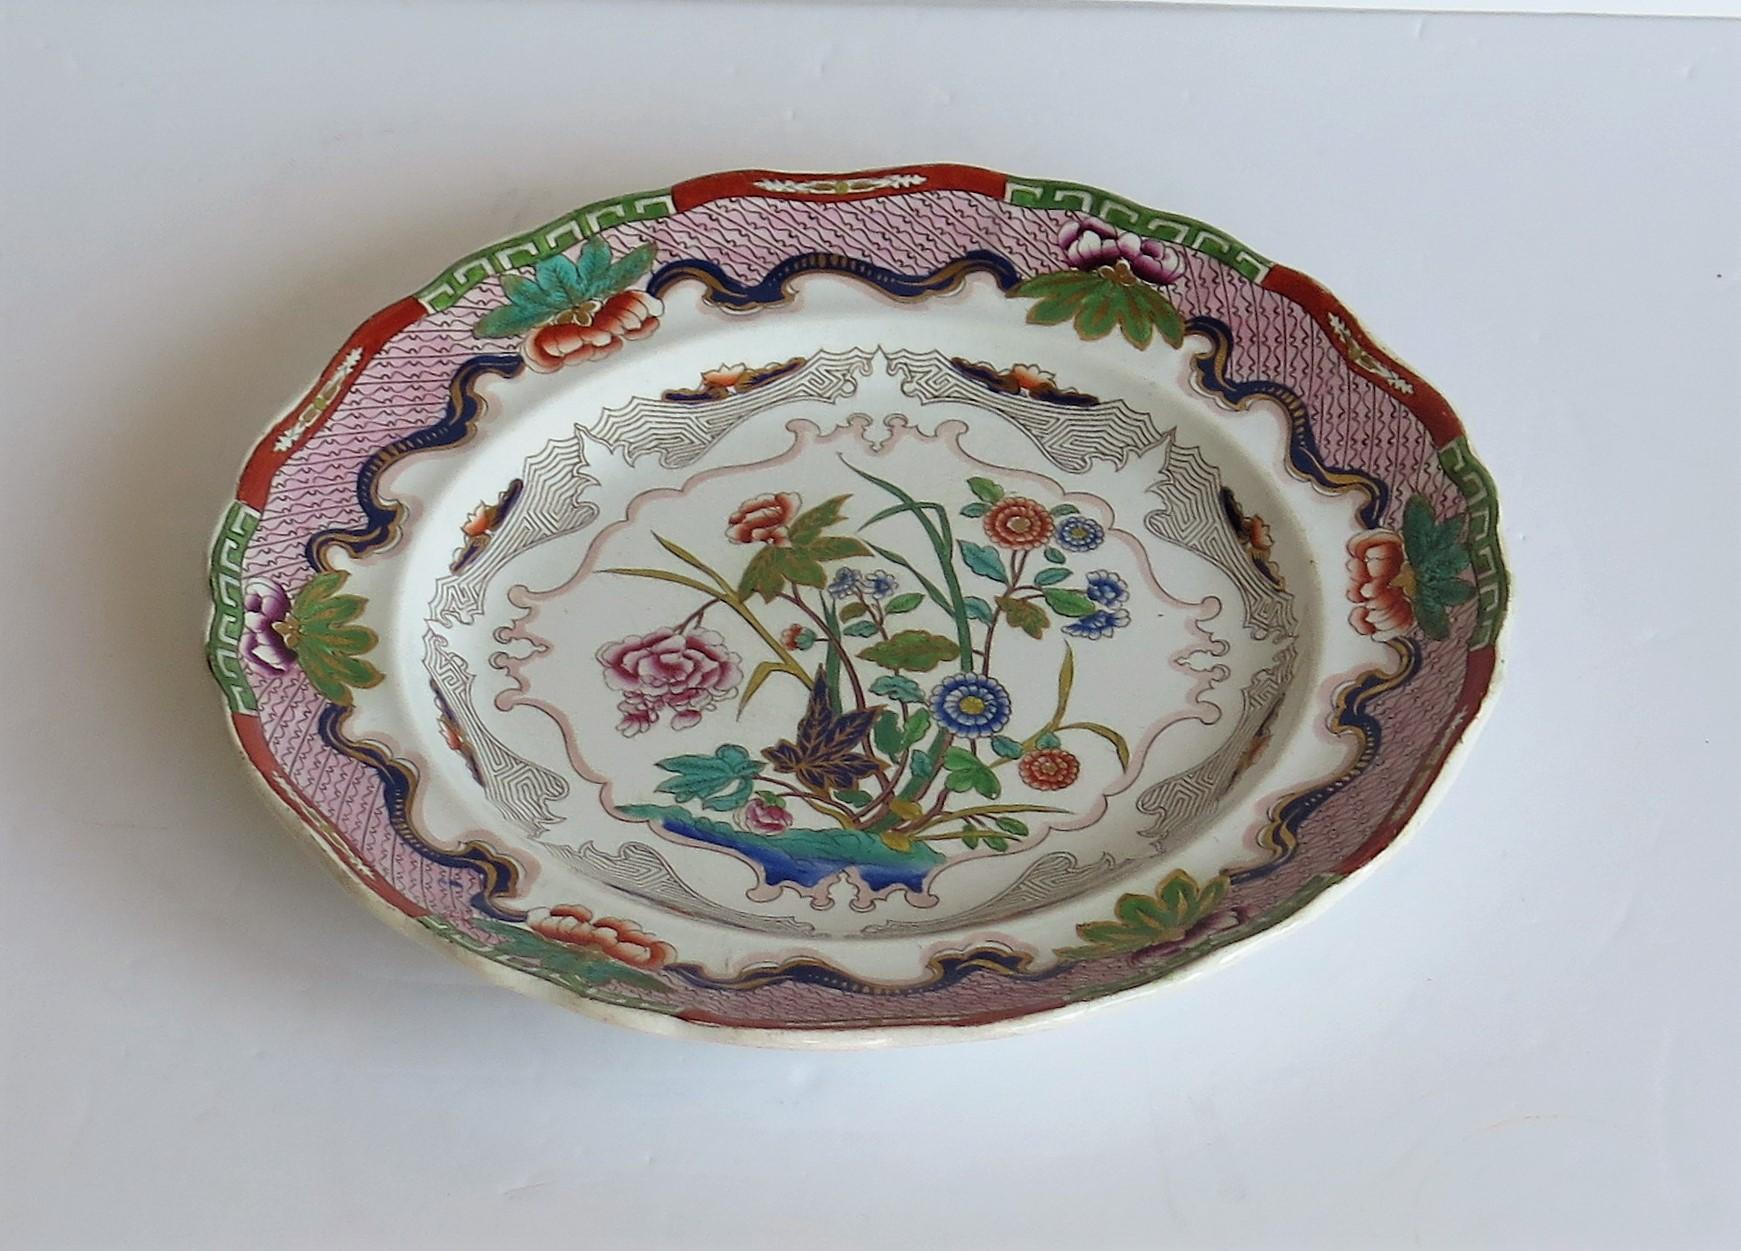 Charles Meigh Ironstone Plate Hand Painted Floral Pattern No. 422, circa 1840 3